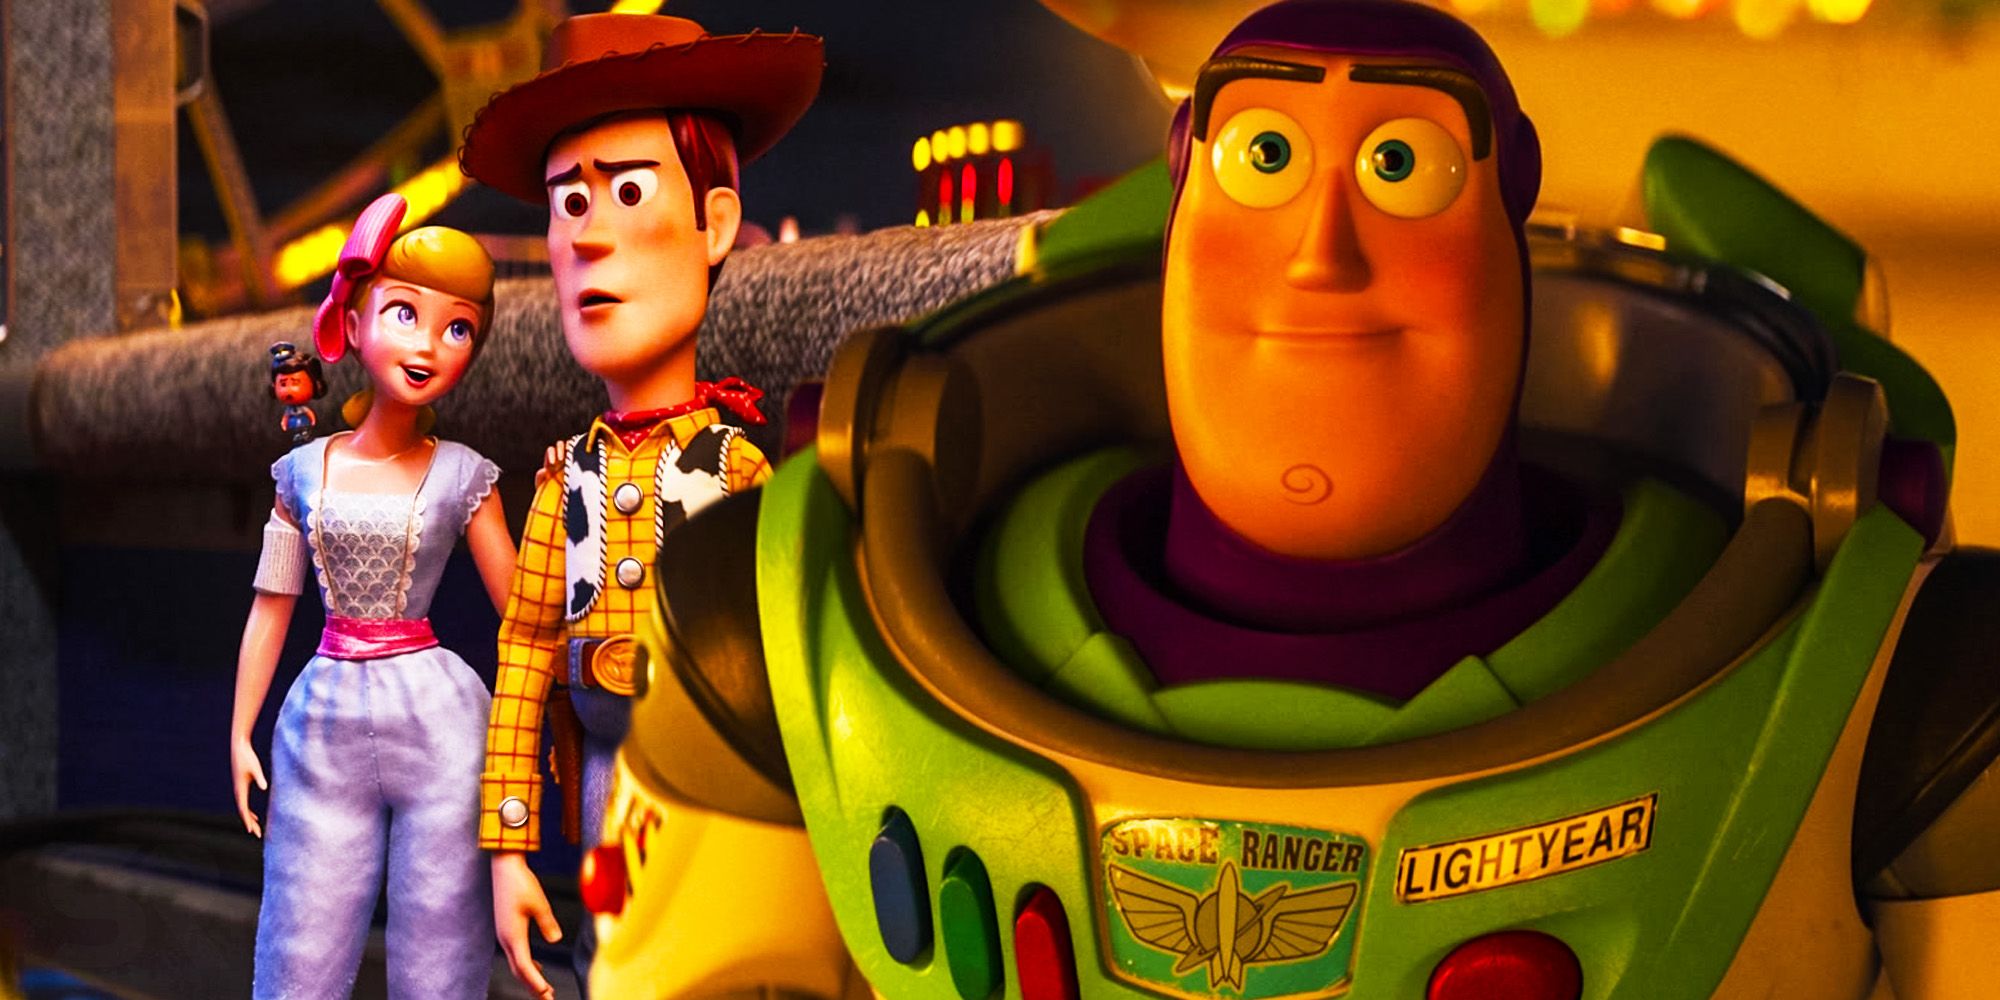 Toy Story 5 News